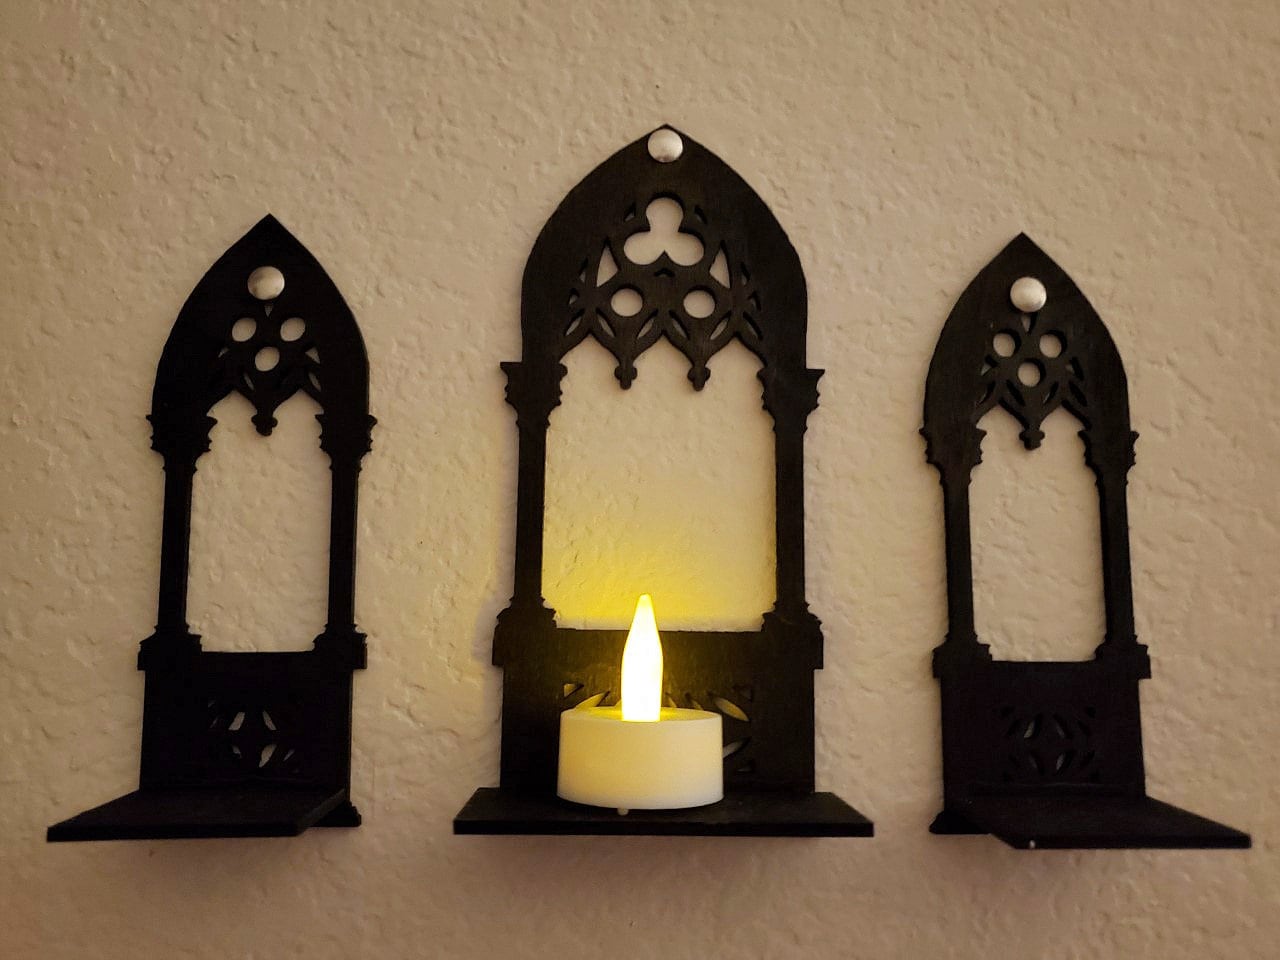 Gothic Arch Architecture Candle holder Digital Files for Laser cutter, 3D Printer, Cricut, ETC. Lord and Lady Towers